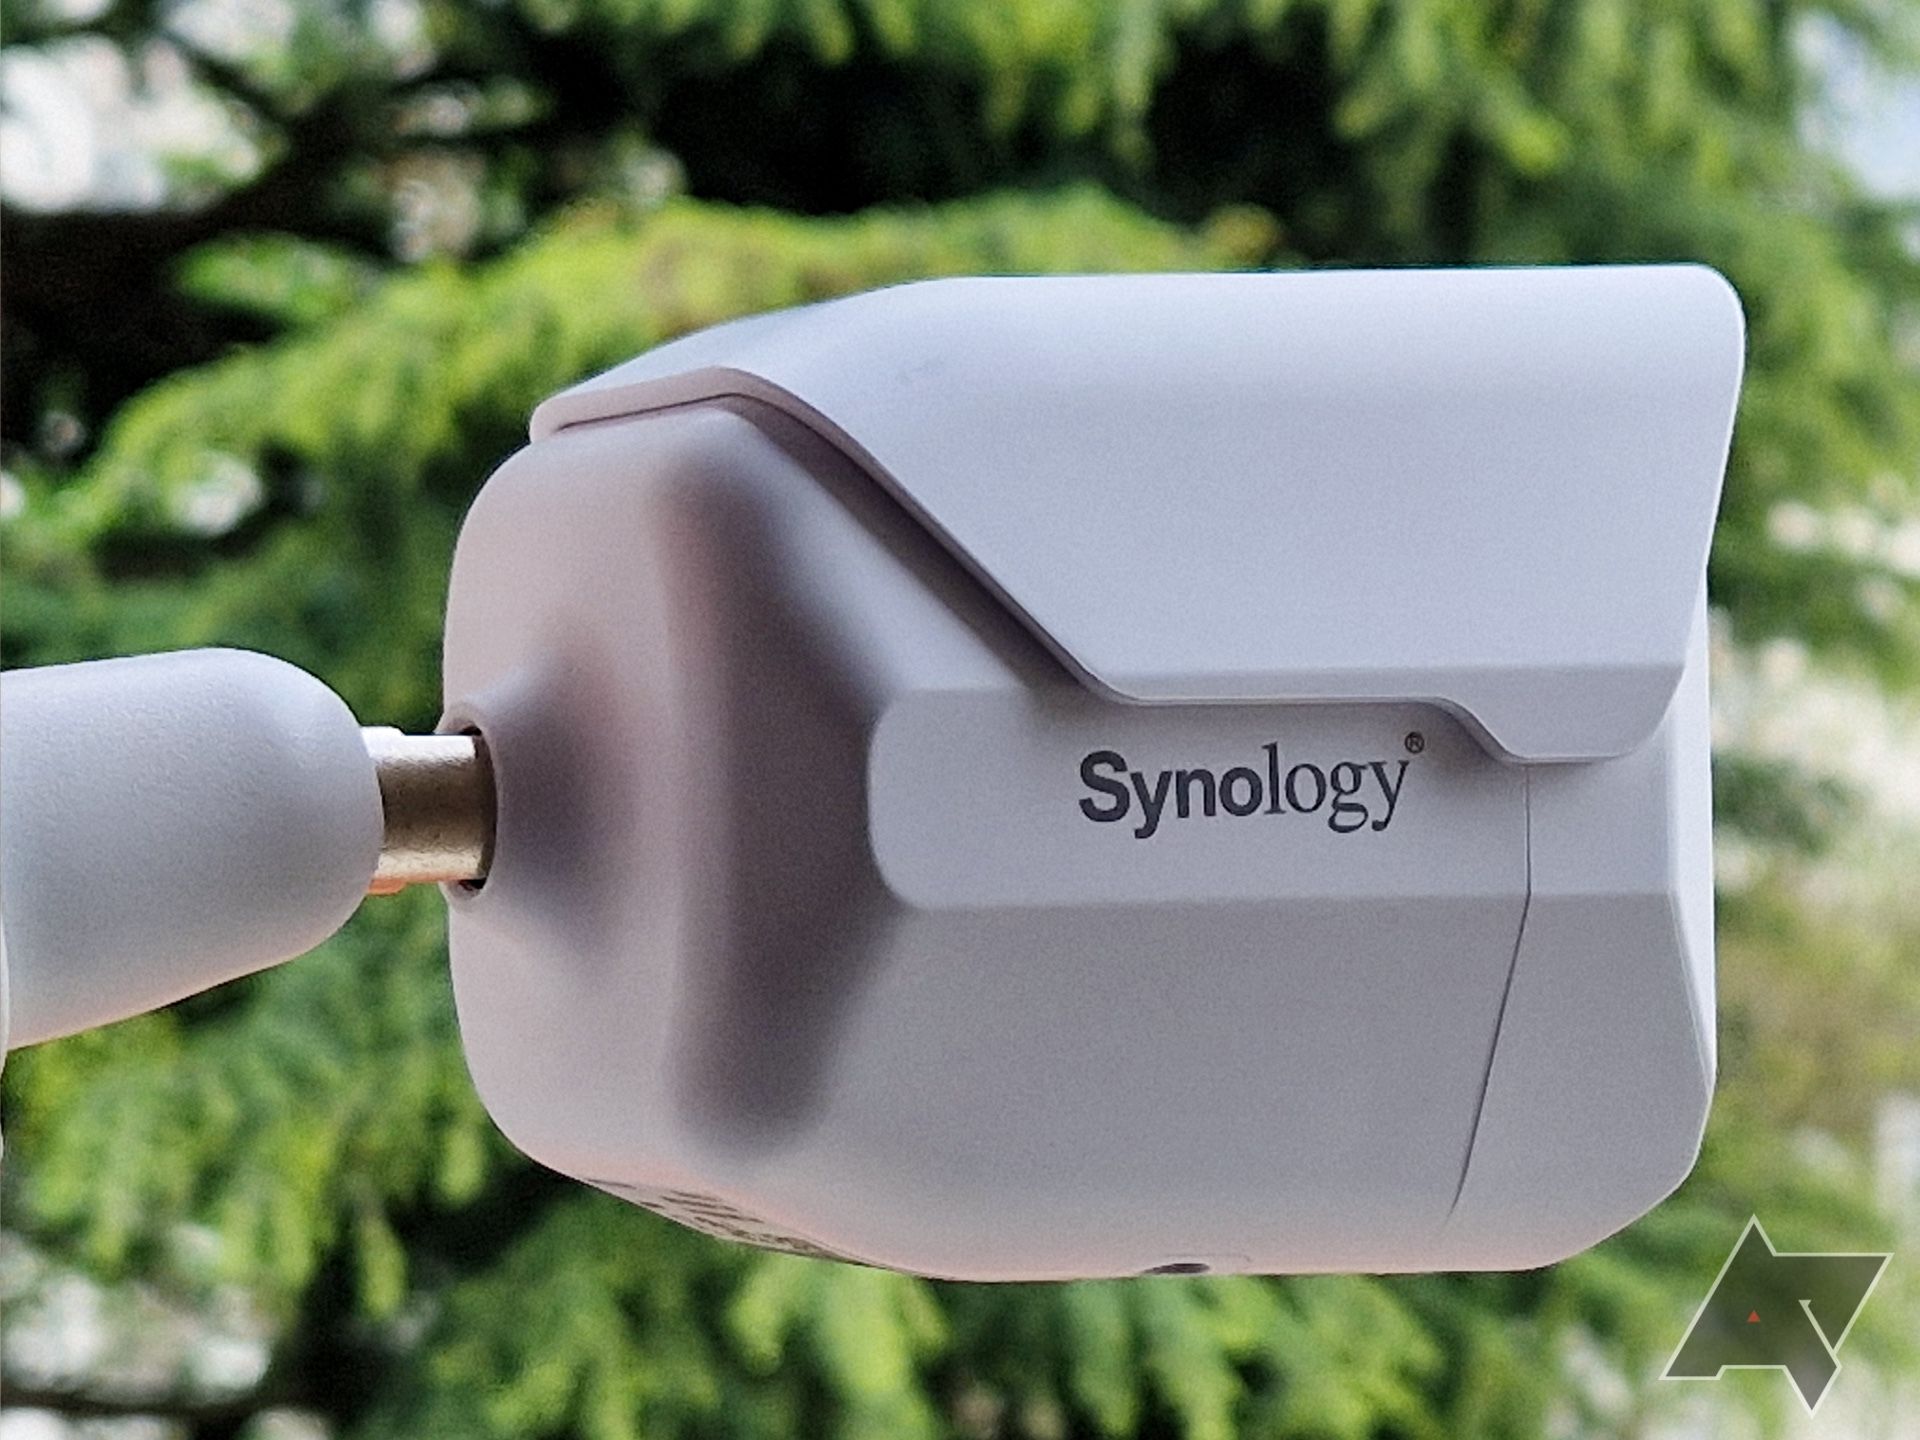 Synology BC500 camera with trees in the background